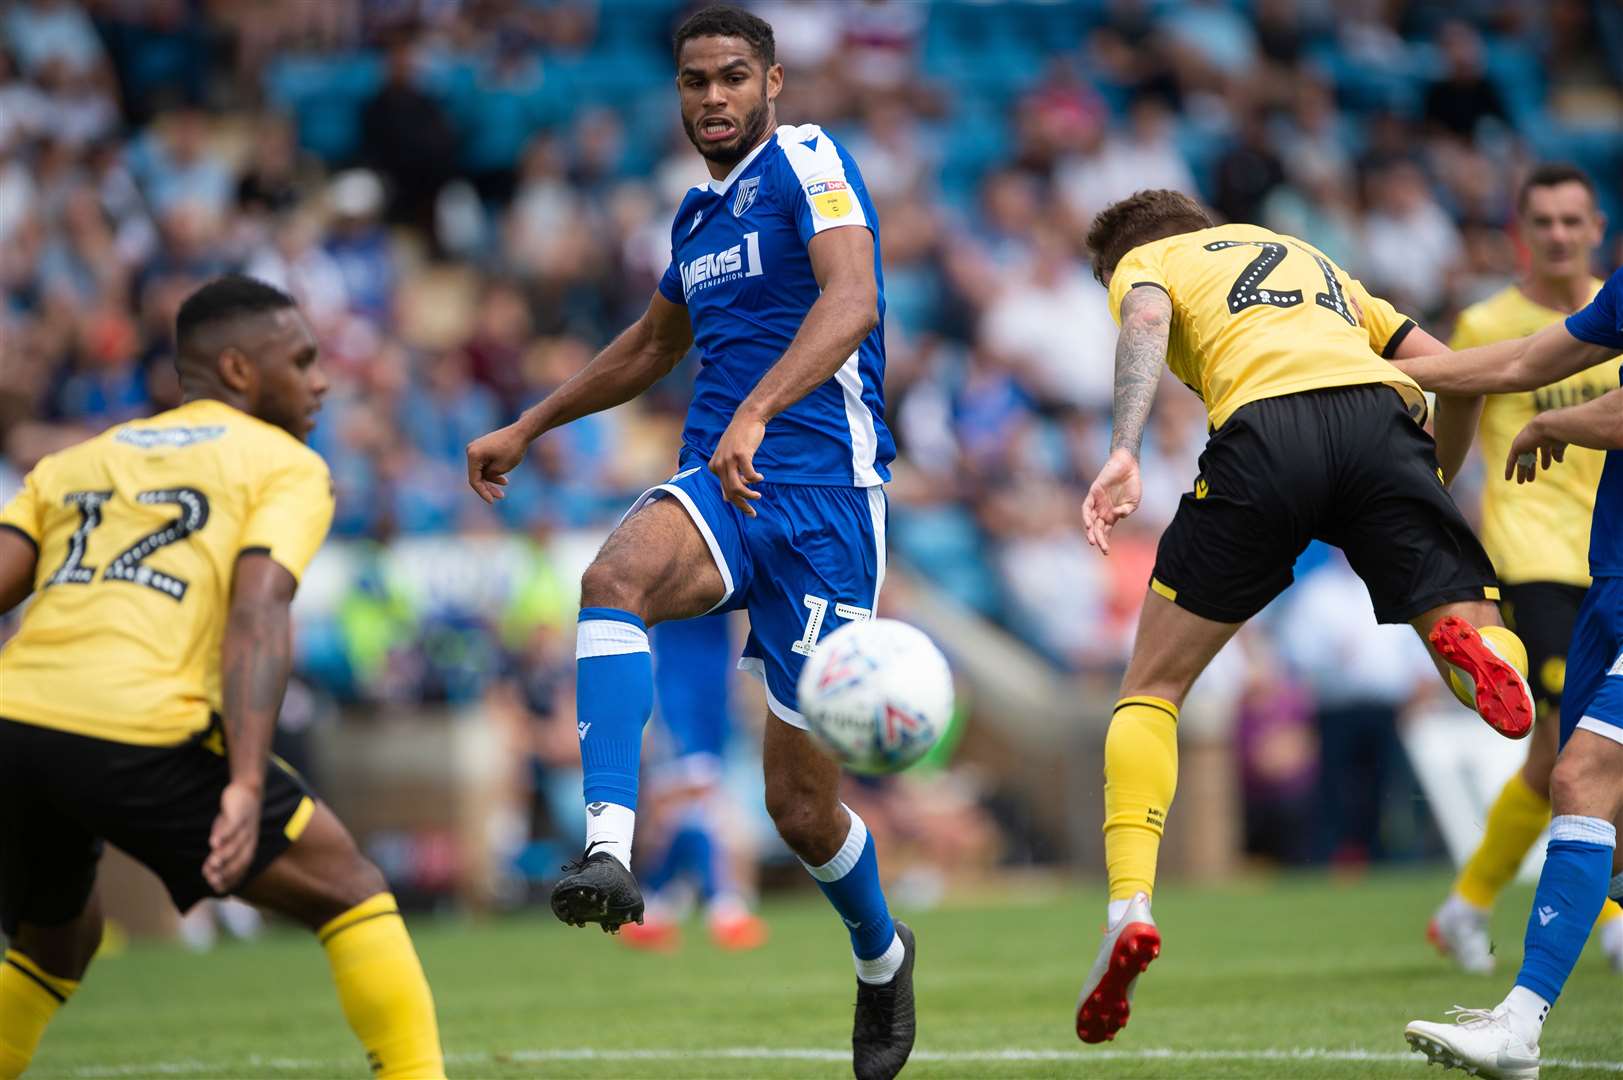 Mikael Mandron in action for Gillingham against Millwall in pre-season Picture: Ady Kerry